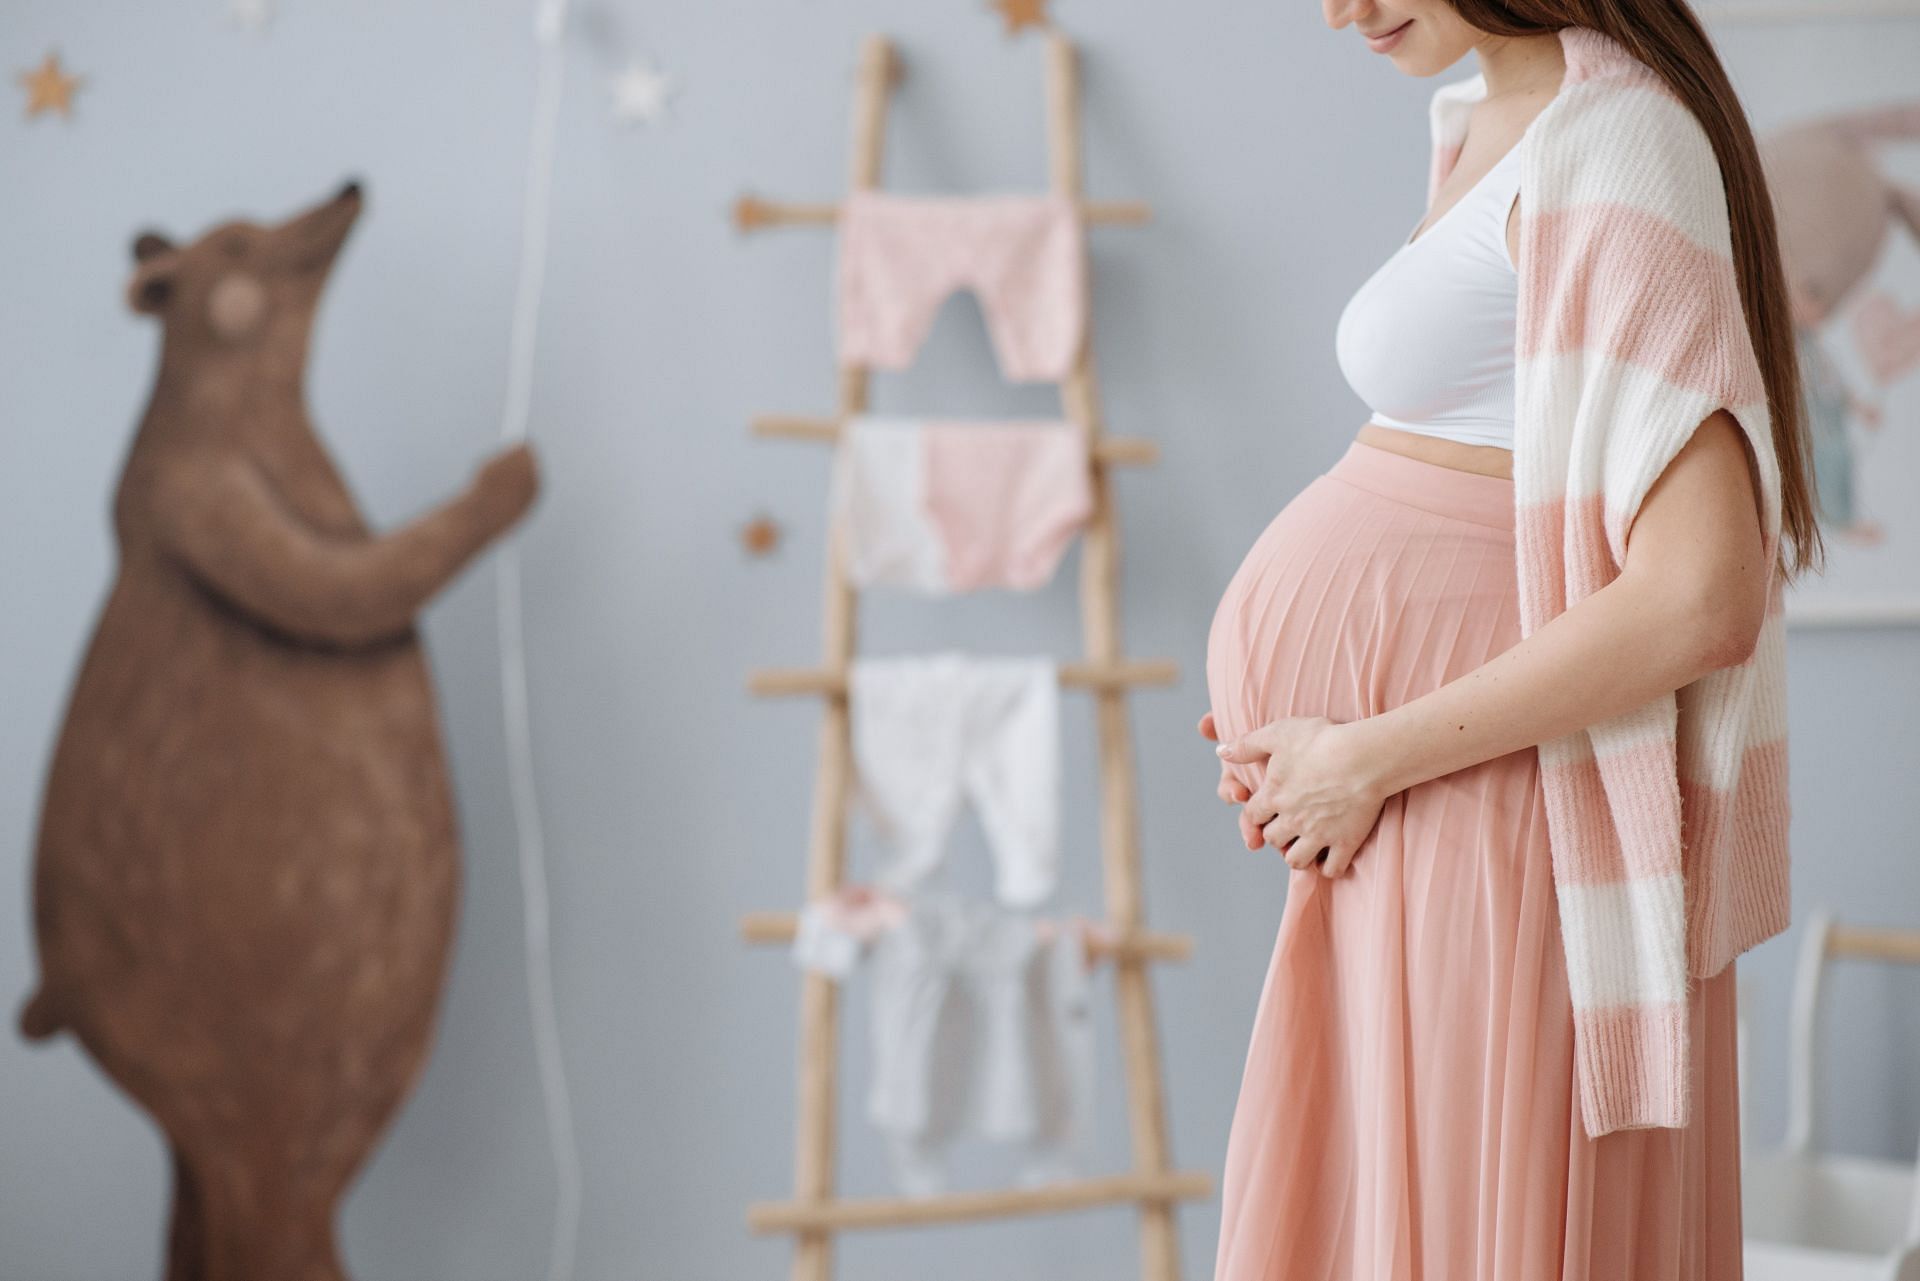 Fluctuations in heart rate during pregnancy is normal, consult your physician about it. (Image via Pexels/Pavel Danilyuk)